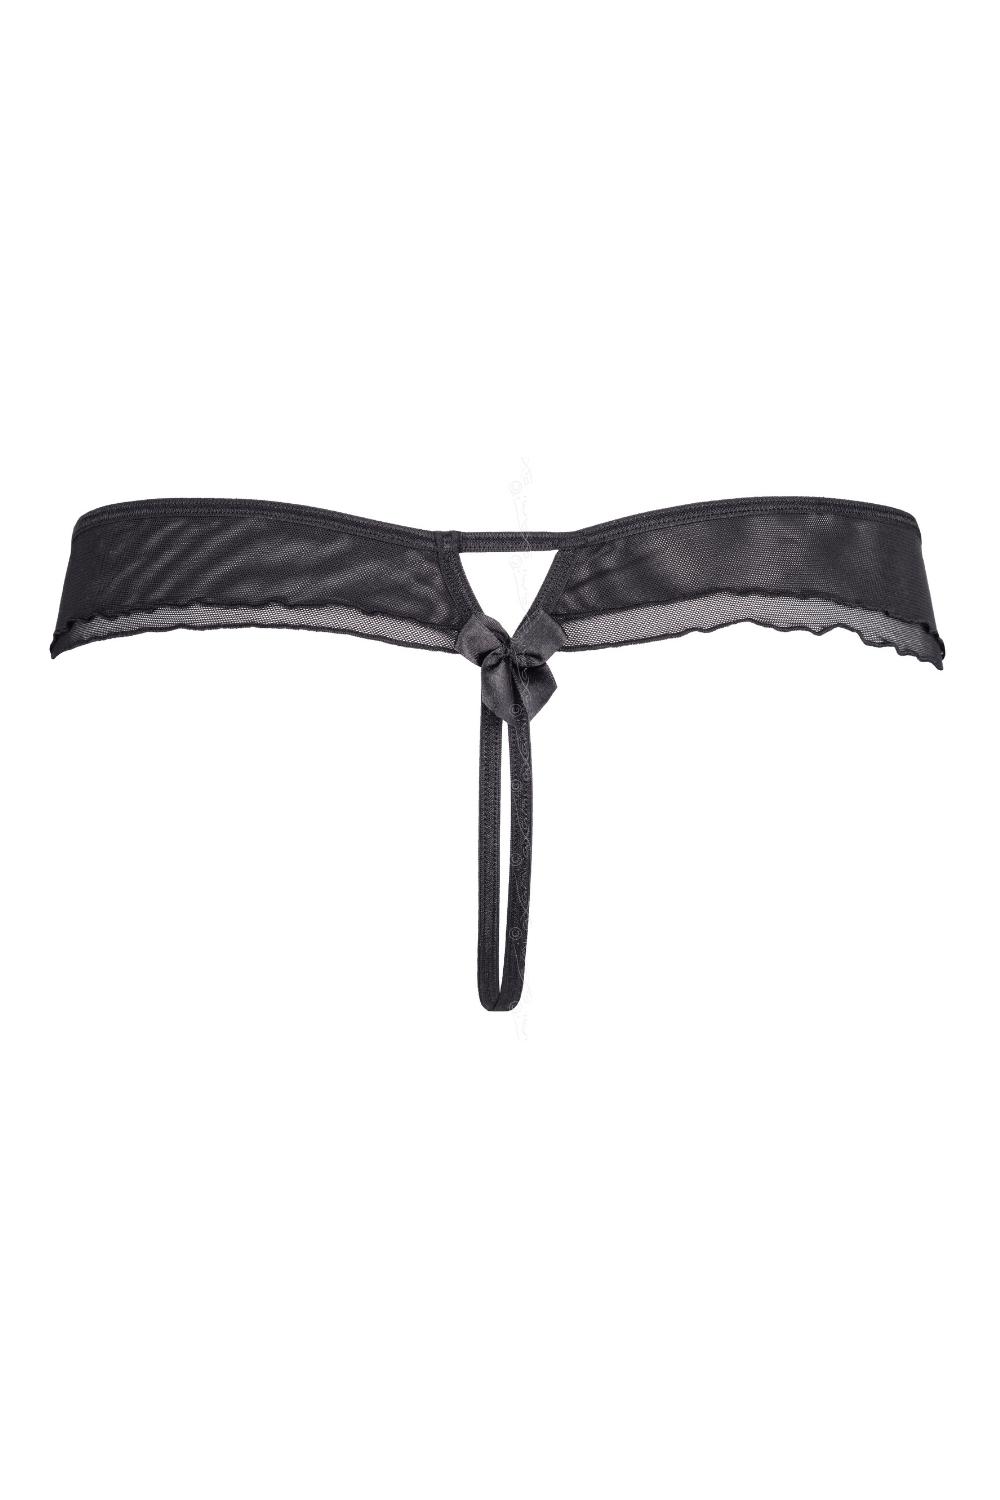 Axami Asteroide Crotchless Thong-Rebel Romance